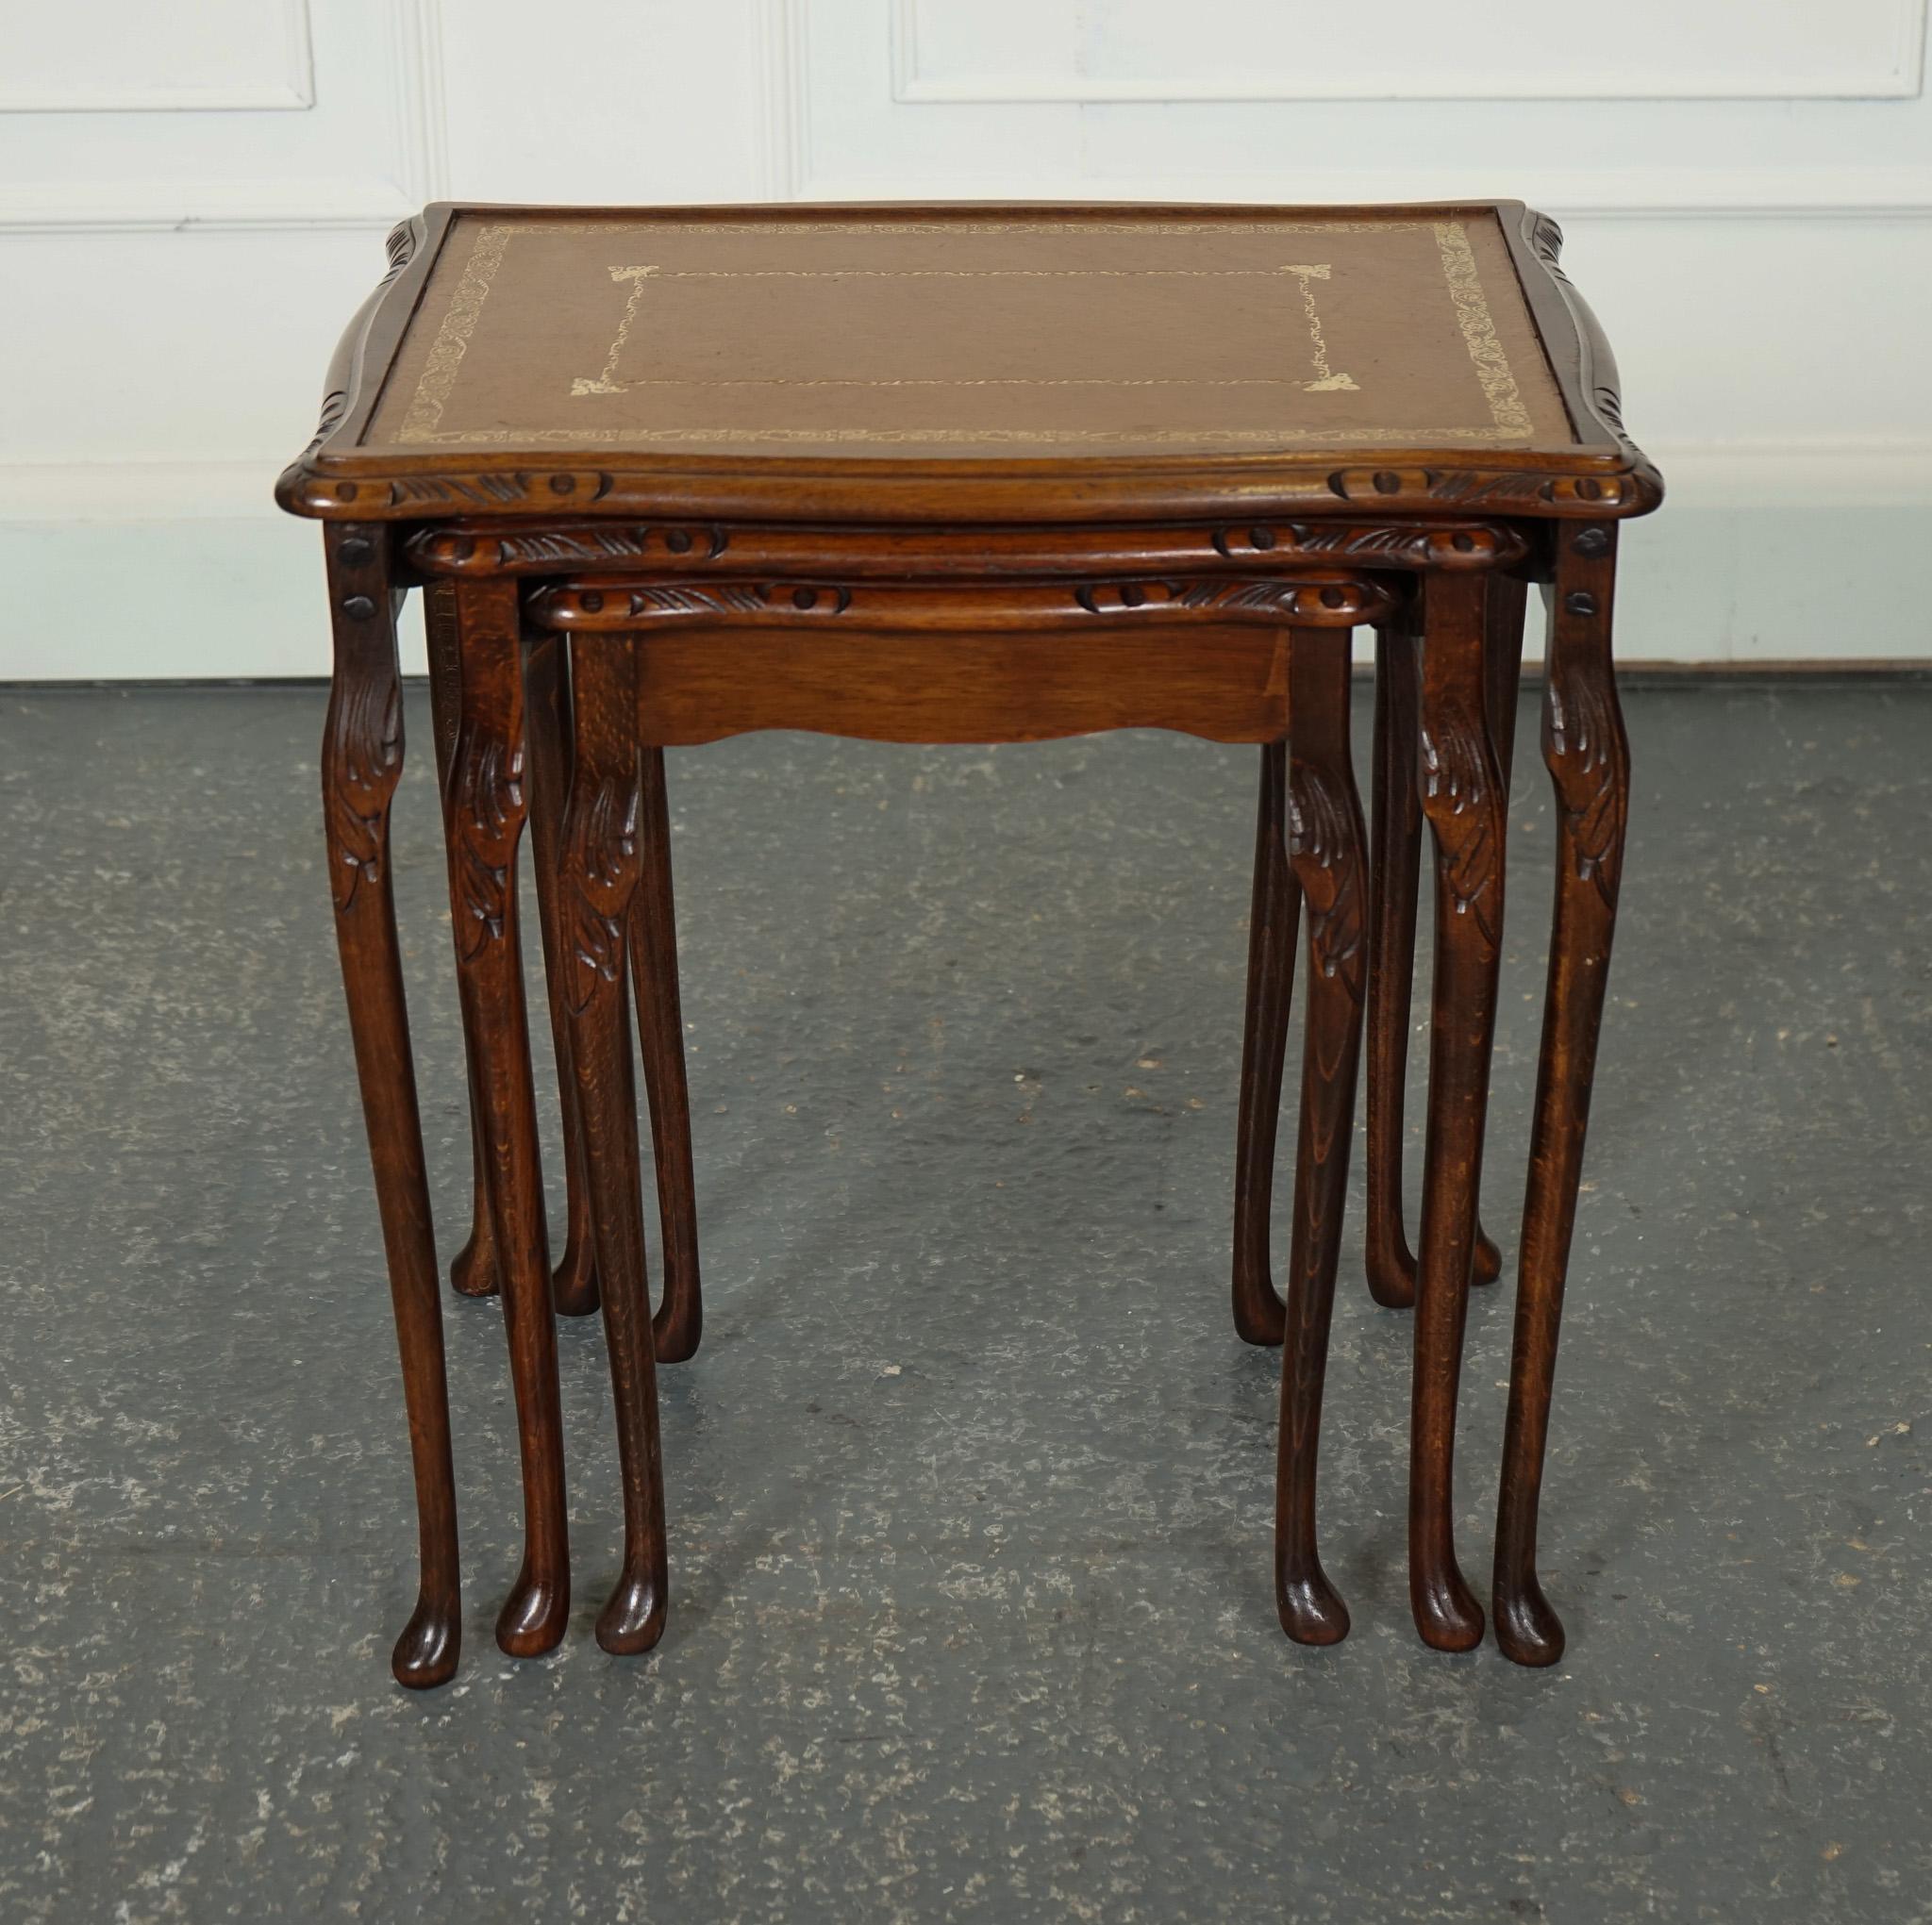 Hand-Crafted VINTAGE NEST OF TABLES QUEEN ANNE STYLE LEGS WiTH BROWN EMBOSSED LEATHER TOP J1 For Sale